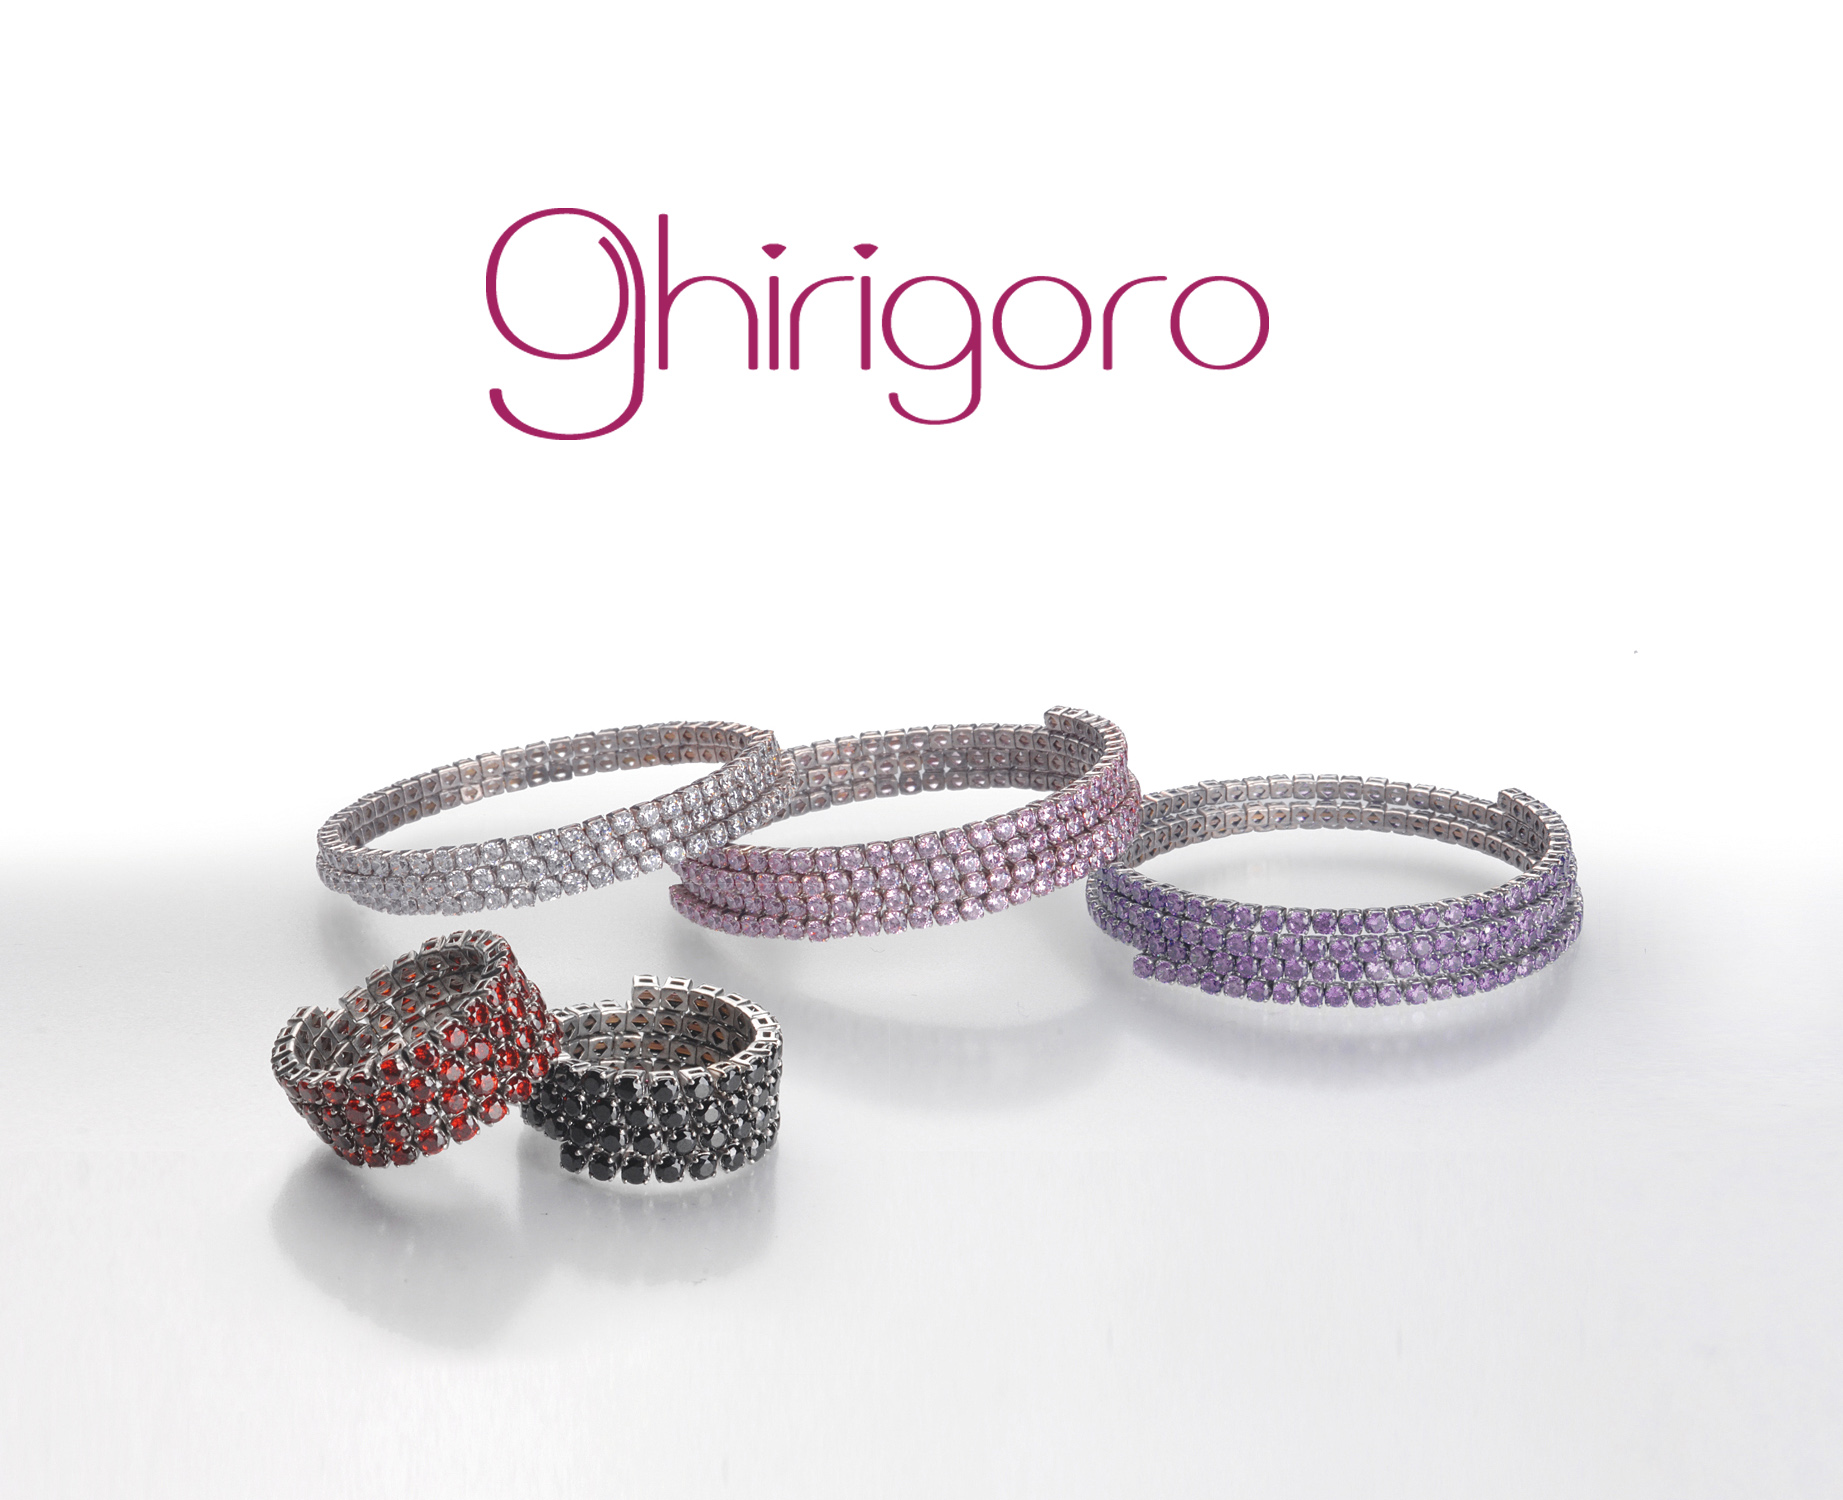 ghirigoro - A new concept of bracelets and rings -